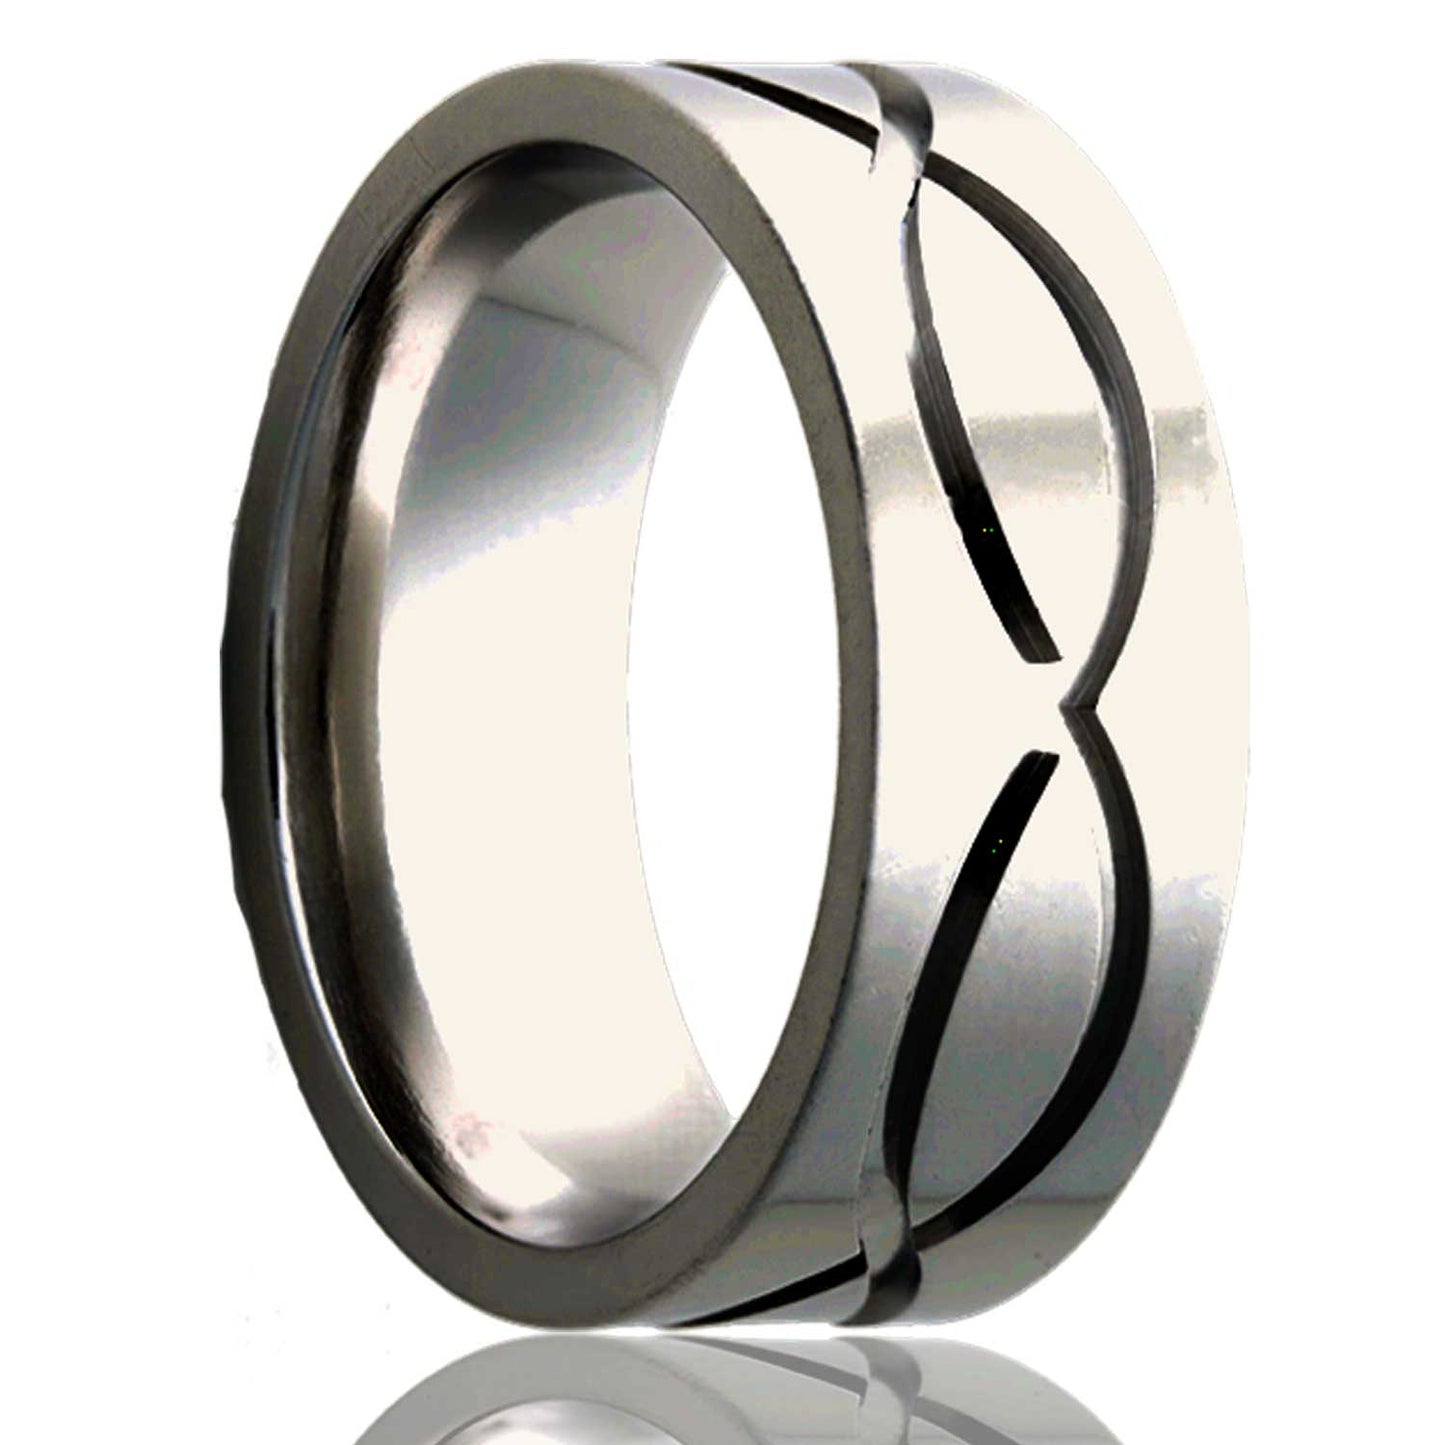 A infinity waves platinum wedding band displayed on a neutral white background.